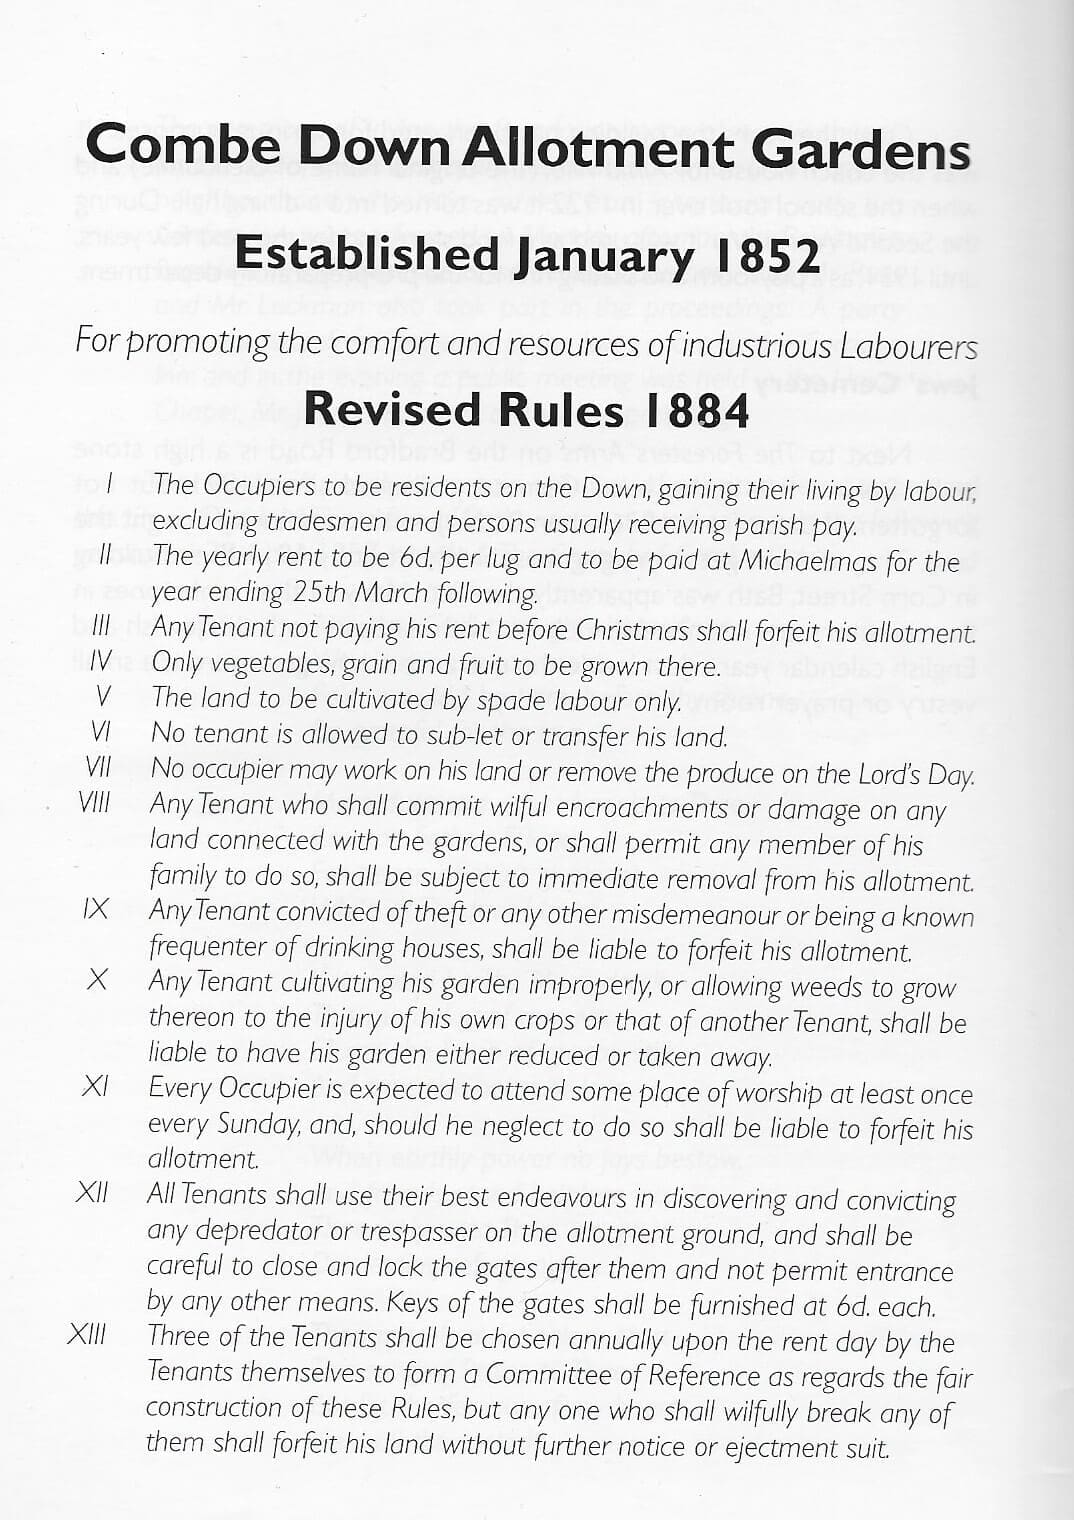 Combe Down allotments 1884 rules